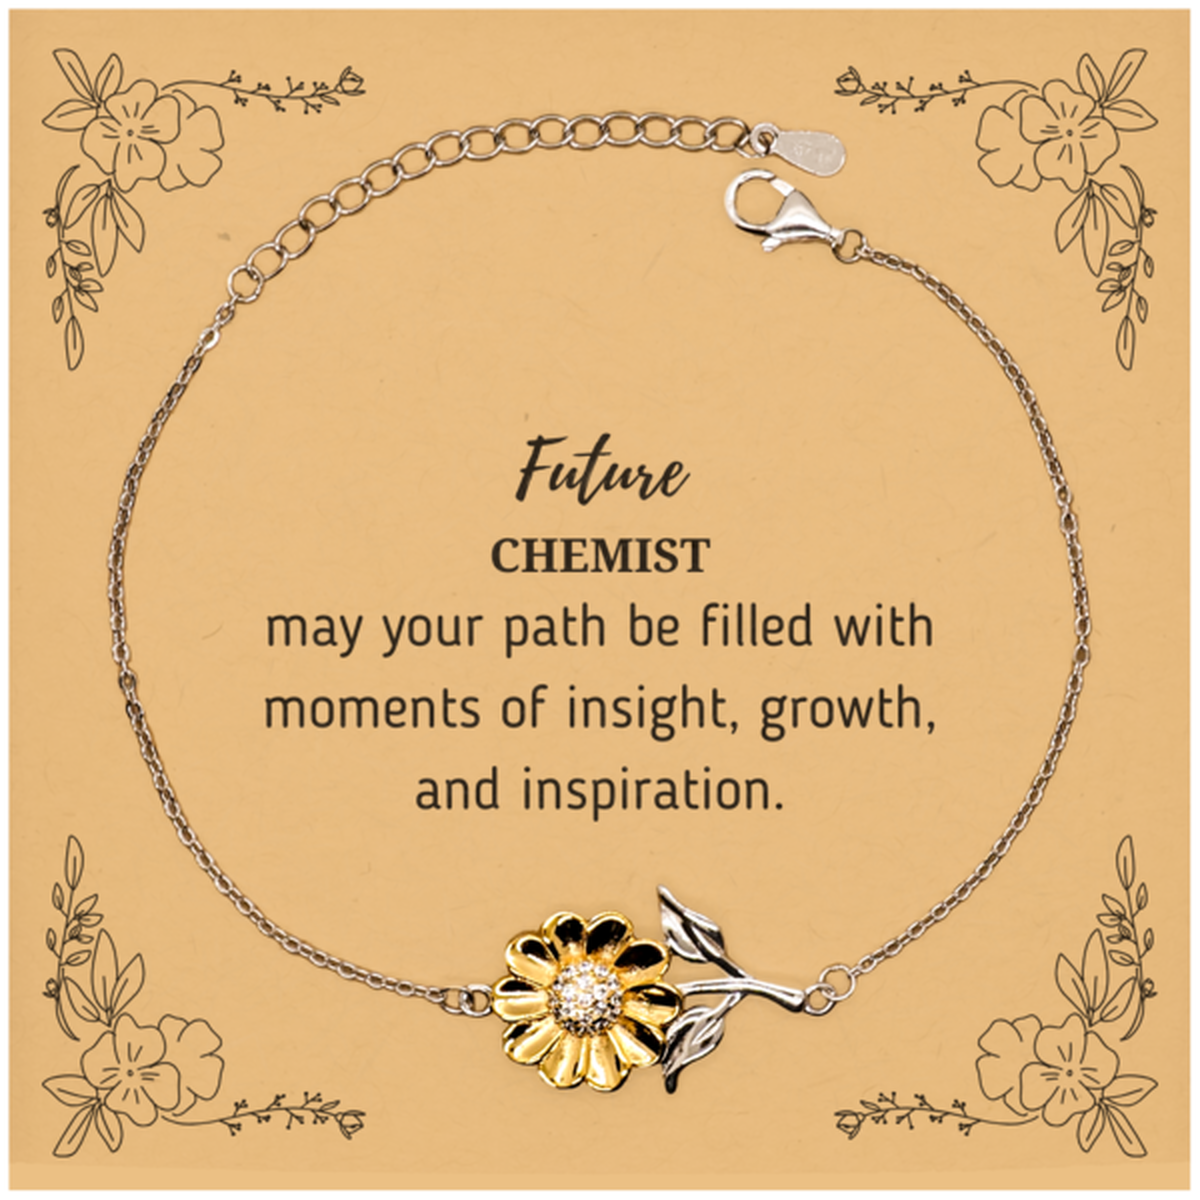 Future Chemist Gifts, May your path be filled with moments of insight, Graduation Gifts for New Chemist, Christmas Unique Sunflower Bracelet For Men, Women, Friends